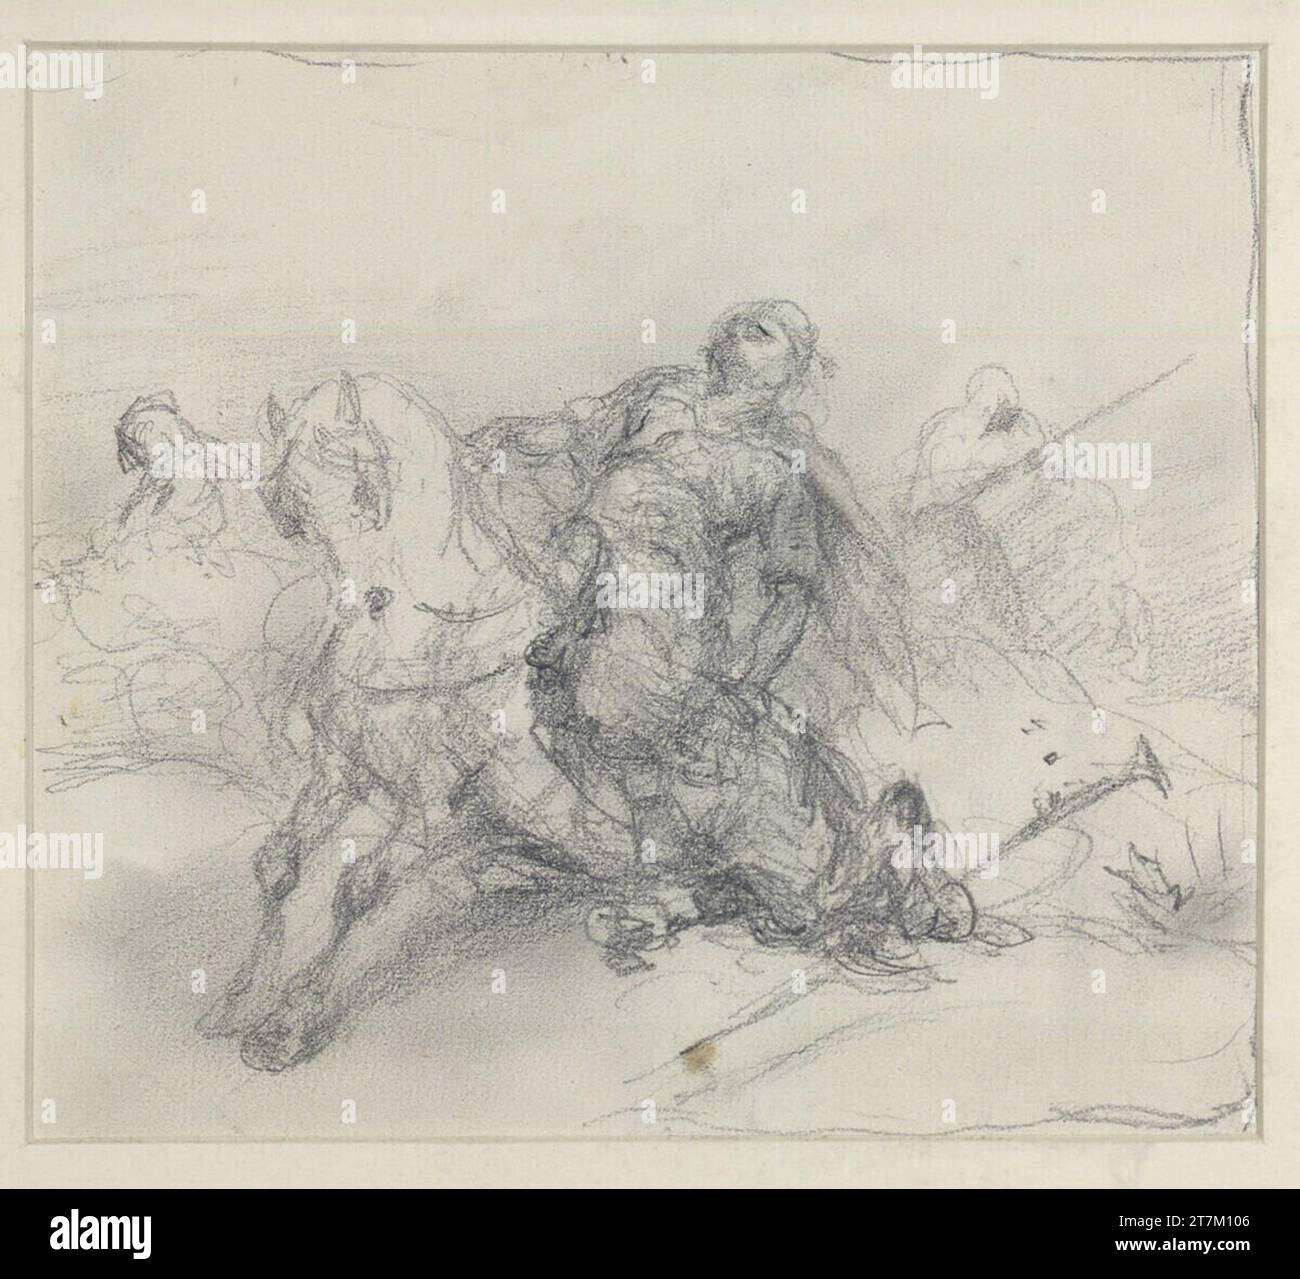 Christian Adolf Schreyer In the fight collapsing Arab riding. Pencil, wiped; sketchy pencil edging line 19. Century , 19th century Stock Photo